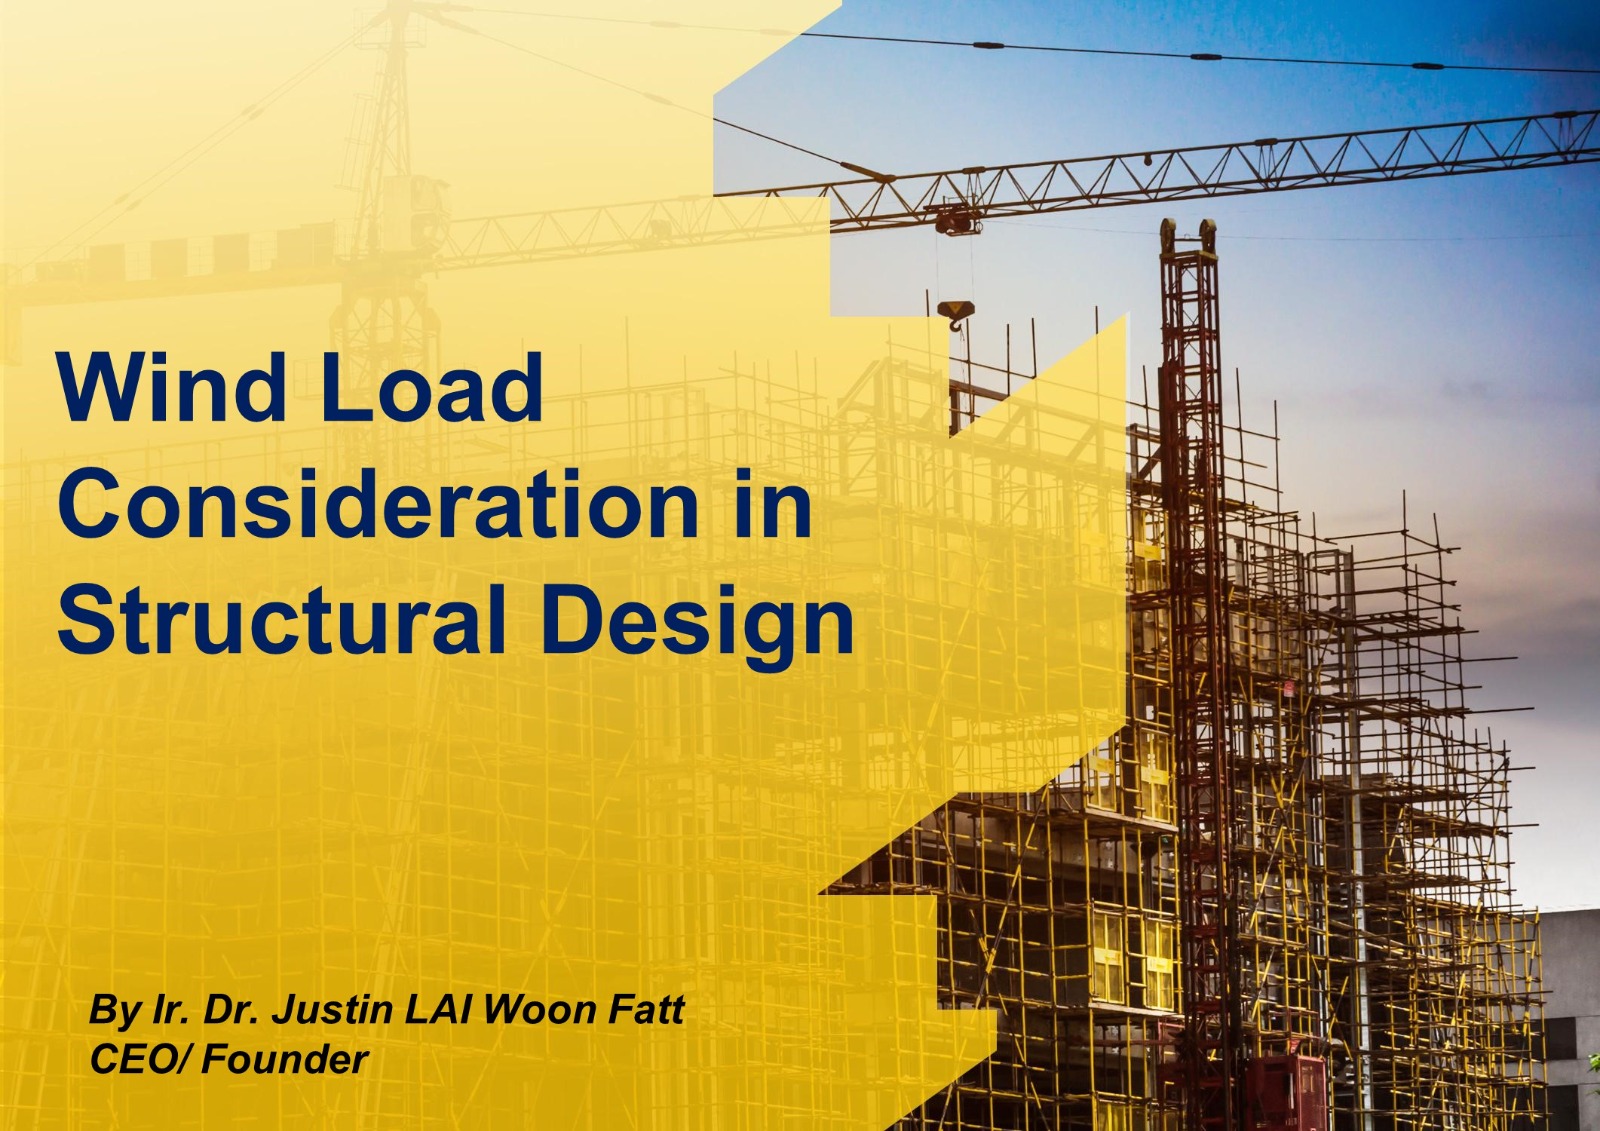 Wind Load Consideration in Structural Design